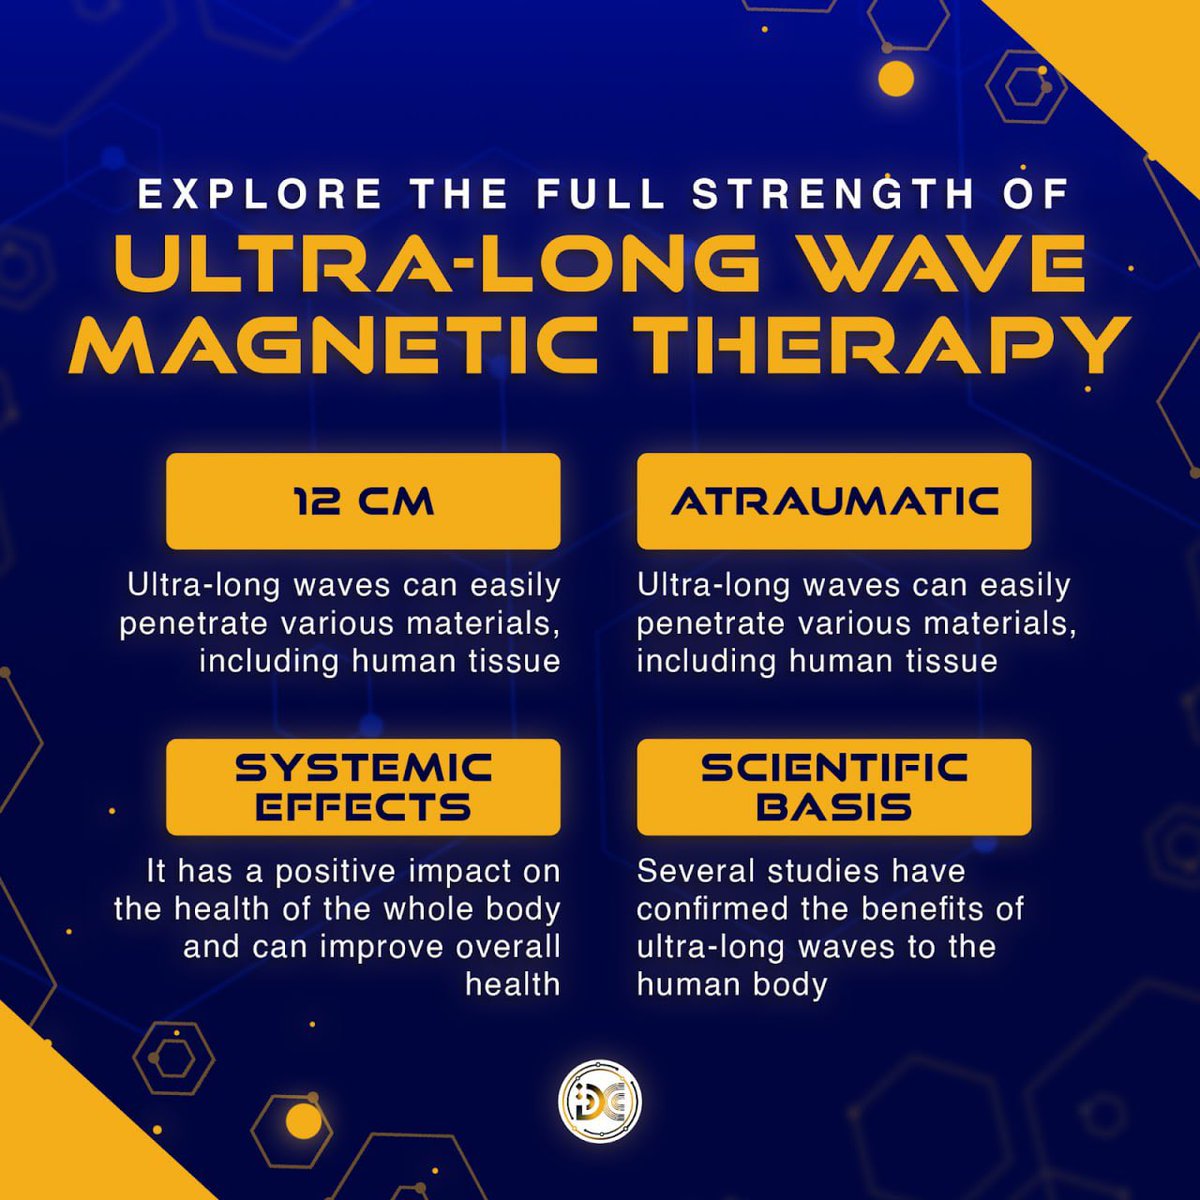 🚀 Introducing DCWave

Wave2Earn: Ultra-long Wave Magnetic Therapy! 🌊

Discover the power of 12CM waves that gently penetrate tissues, providing holistic benefits backed by scientific research. Elevate your well-being with cutting-edge #HealthTech! 🌟

Learn more: